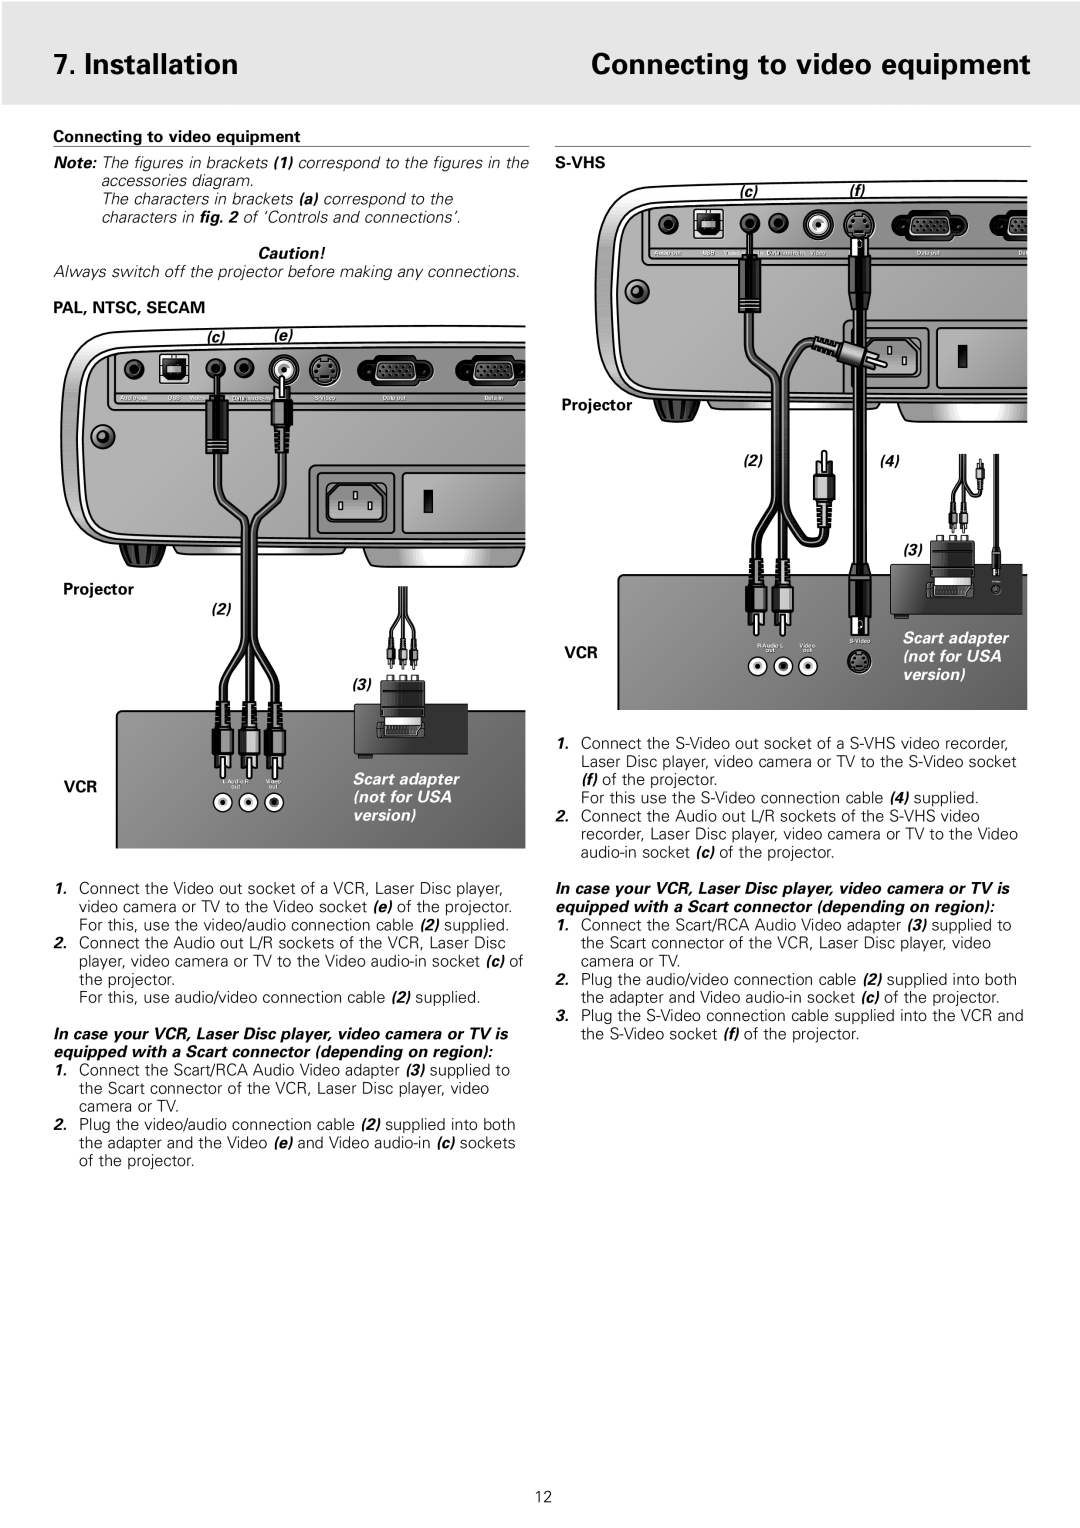 Philips cSmart Series manual Connecting to video equipment, Installation, accessories diagram, Pal, Ntsc, Secam, Projector 